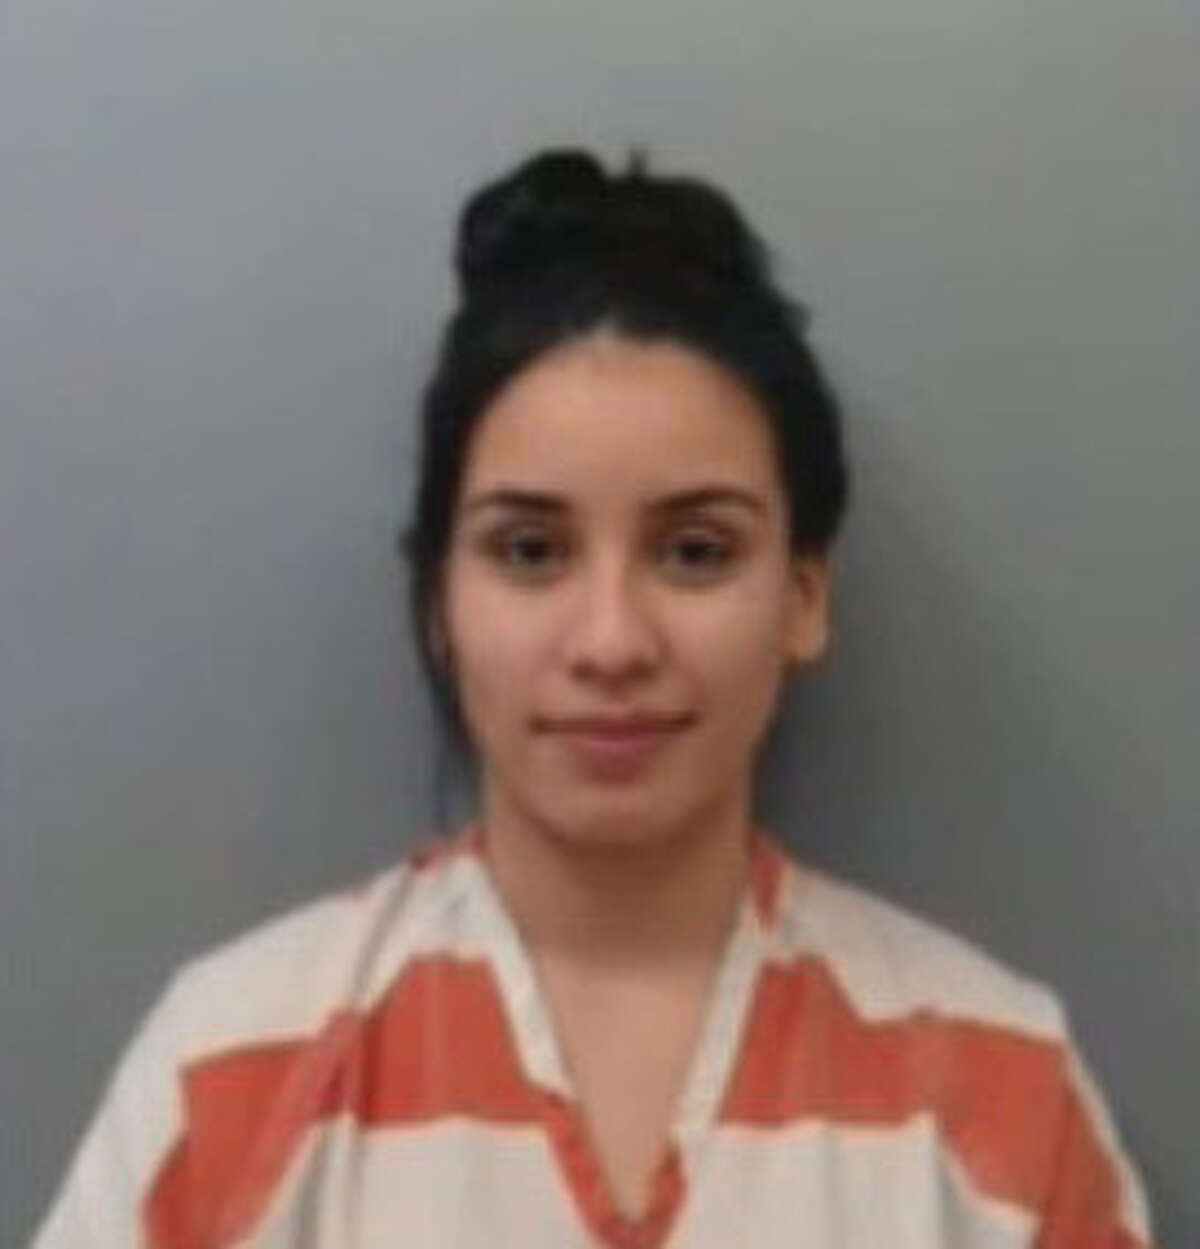 Sylvia Valeria Lerma, 25, was charged with aggravated assault with a deadly weapon.